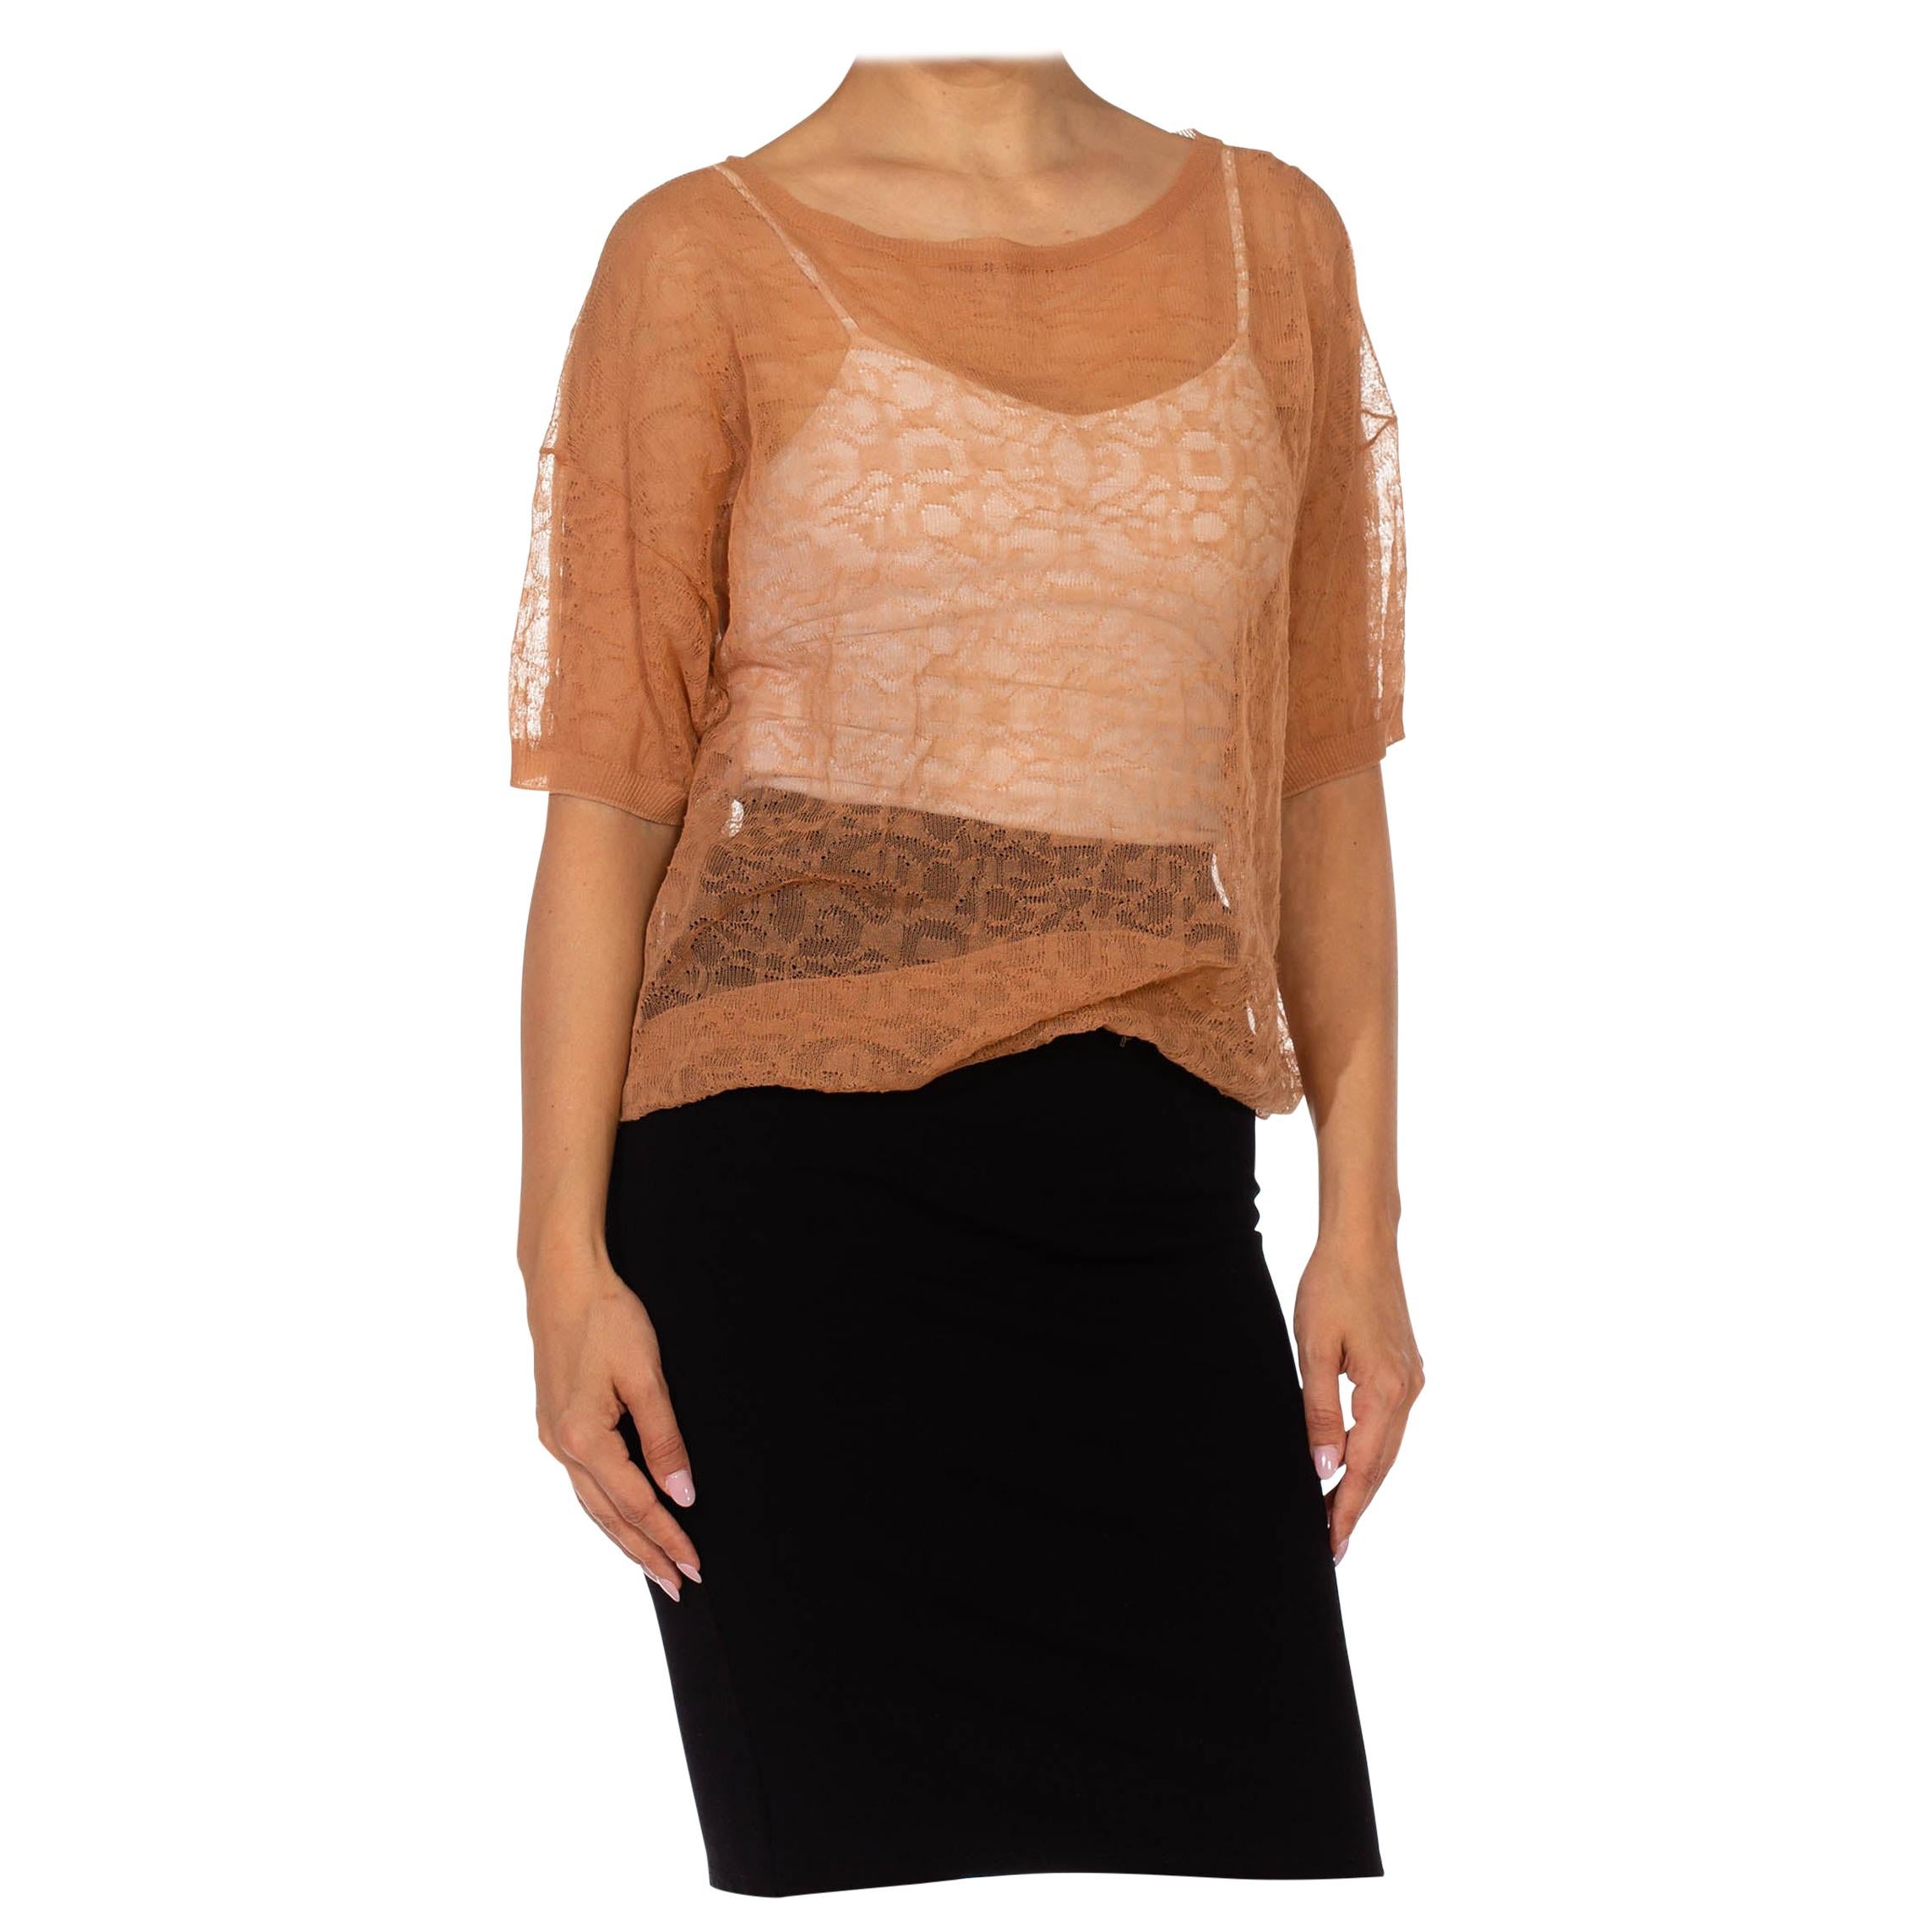 2000S DRIES VAN NOTEN Beige Poly/Cotton Abstracted Lace Knit Top